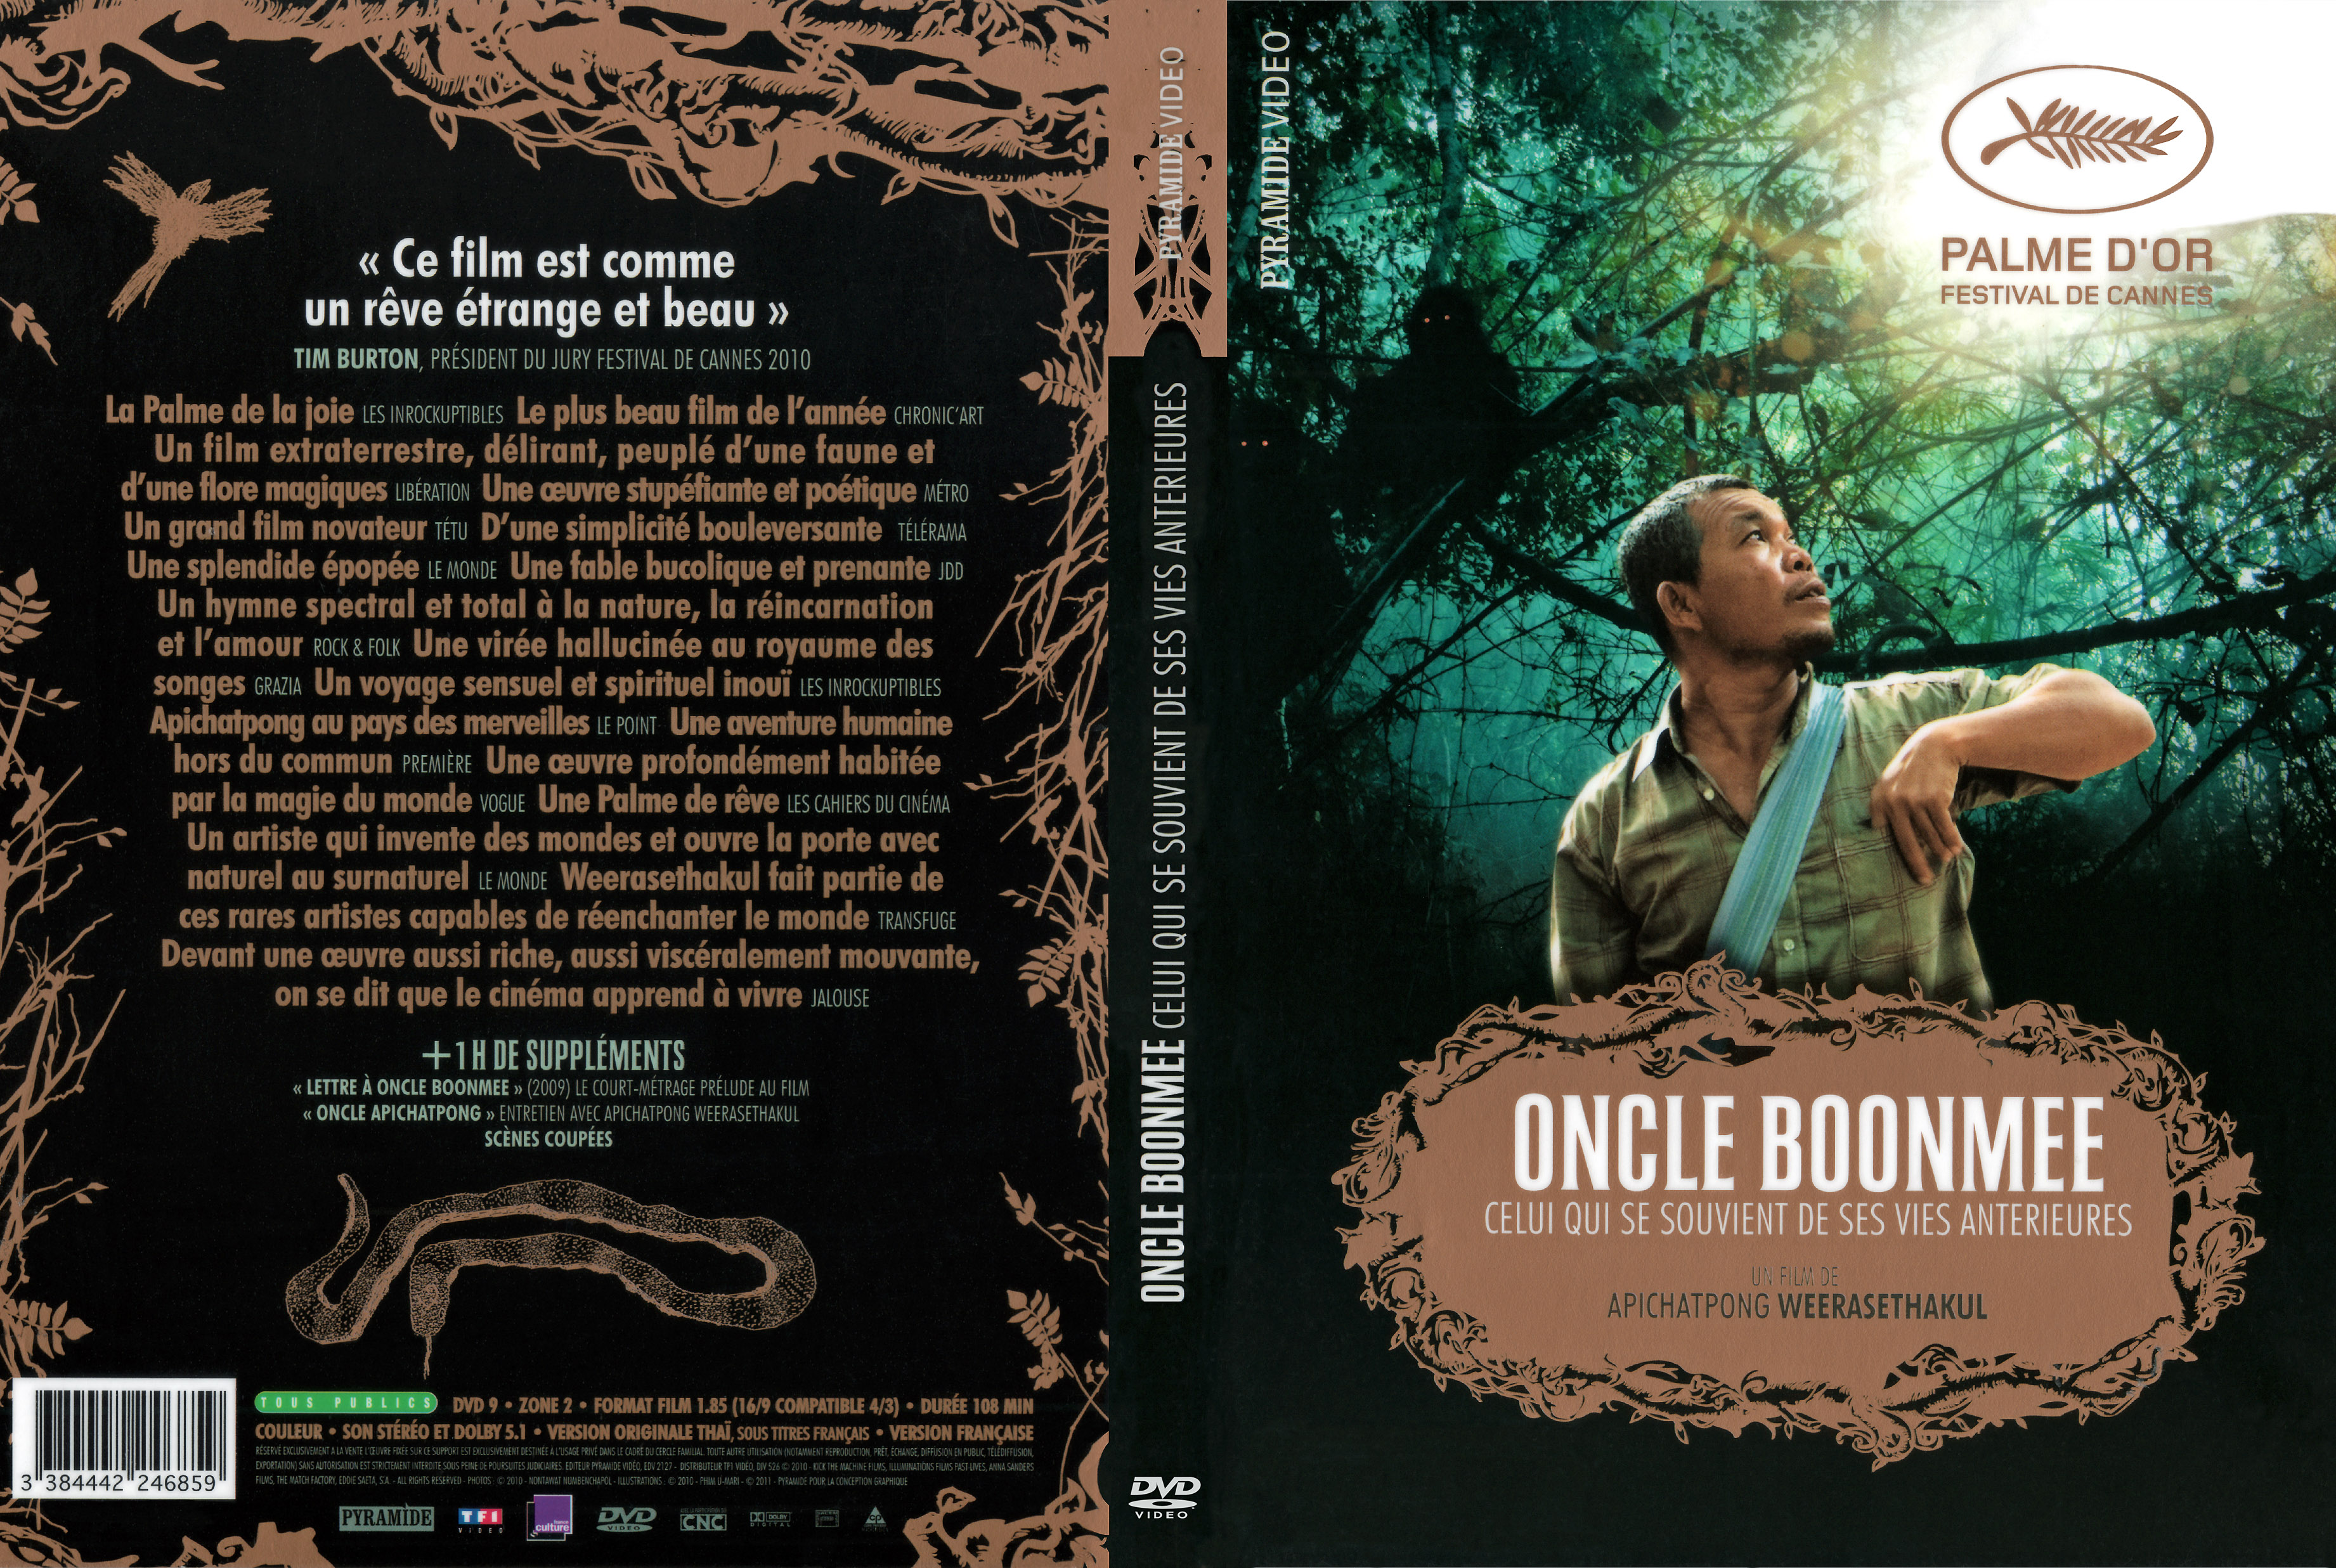 Jaquette DVD Oncle Boonmee